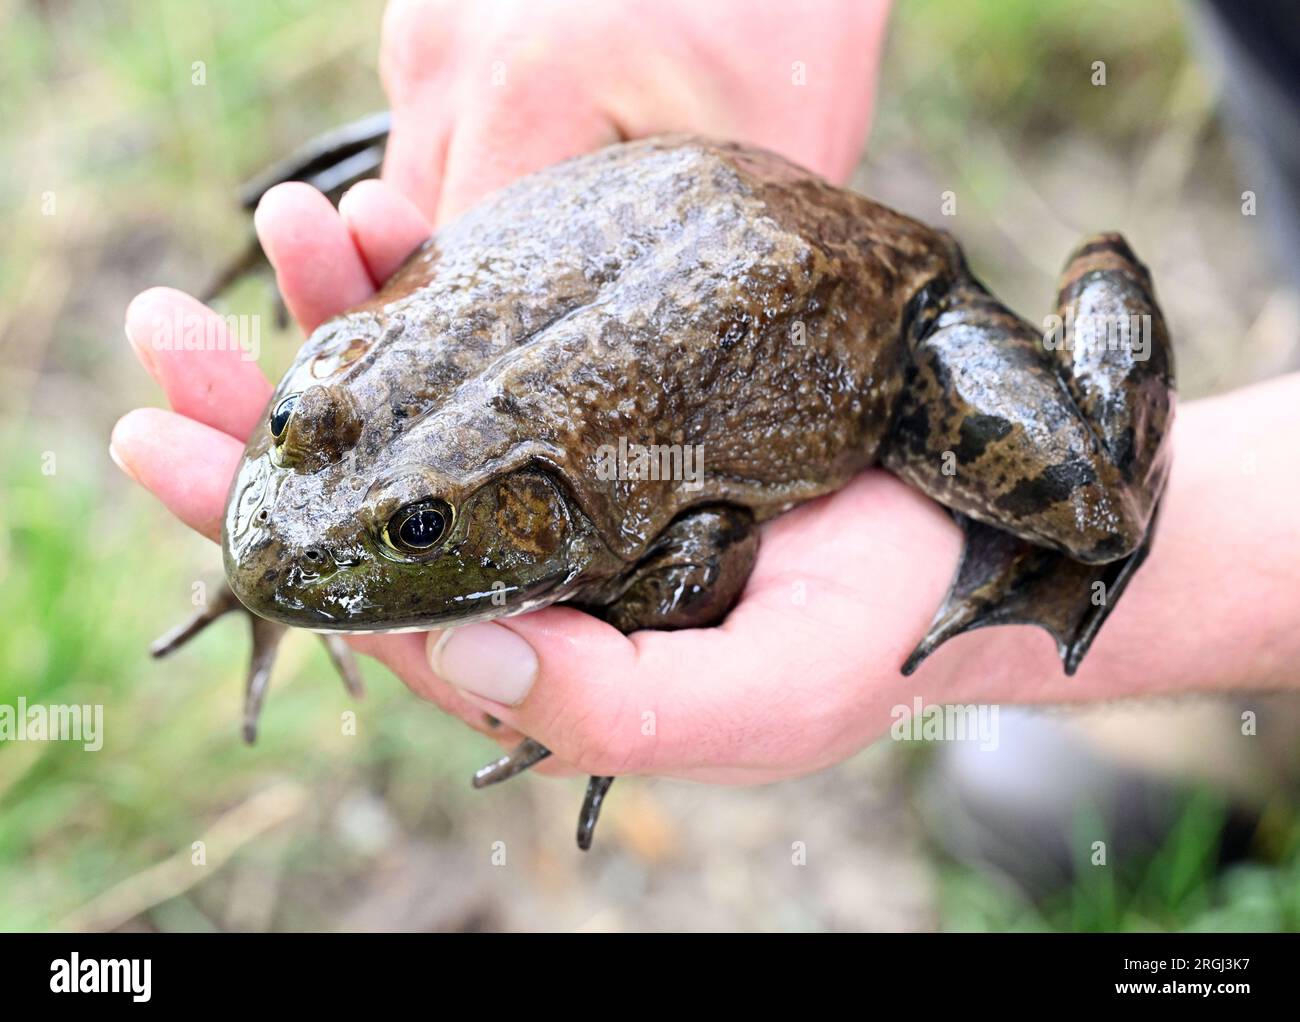 09 August 2023, Rhineland-Palatinate, Hördt: At an information meeting of the Struktur- und Genehmigungsdirektion Süd (SGD Süd) on the bullfrog, a live captured North American bullfrog is shown, it is a female about four years old. (to dpa: 'Authorities want to further combat North American bullfrog') Photo: Uli Deck/dpa Stock Photo